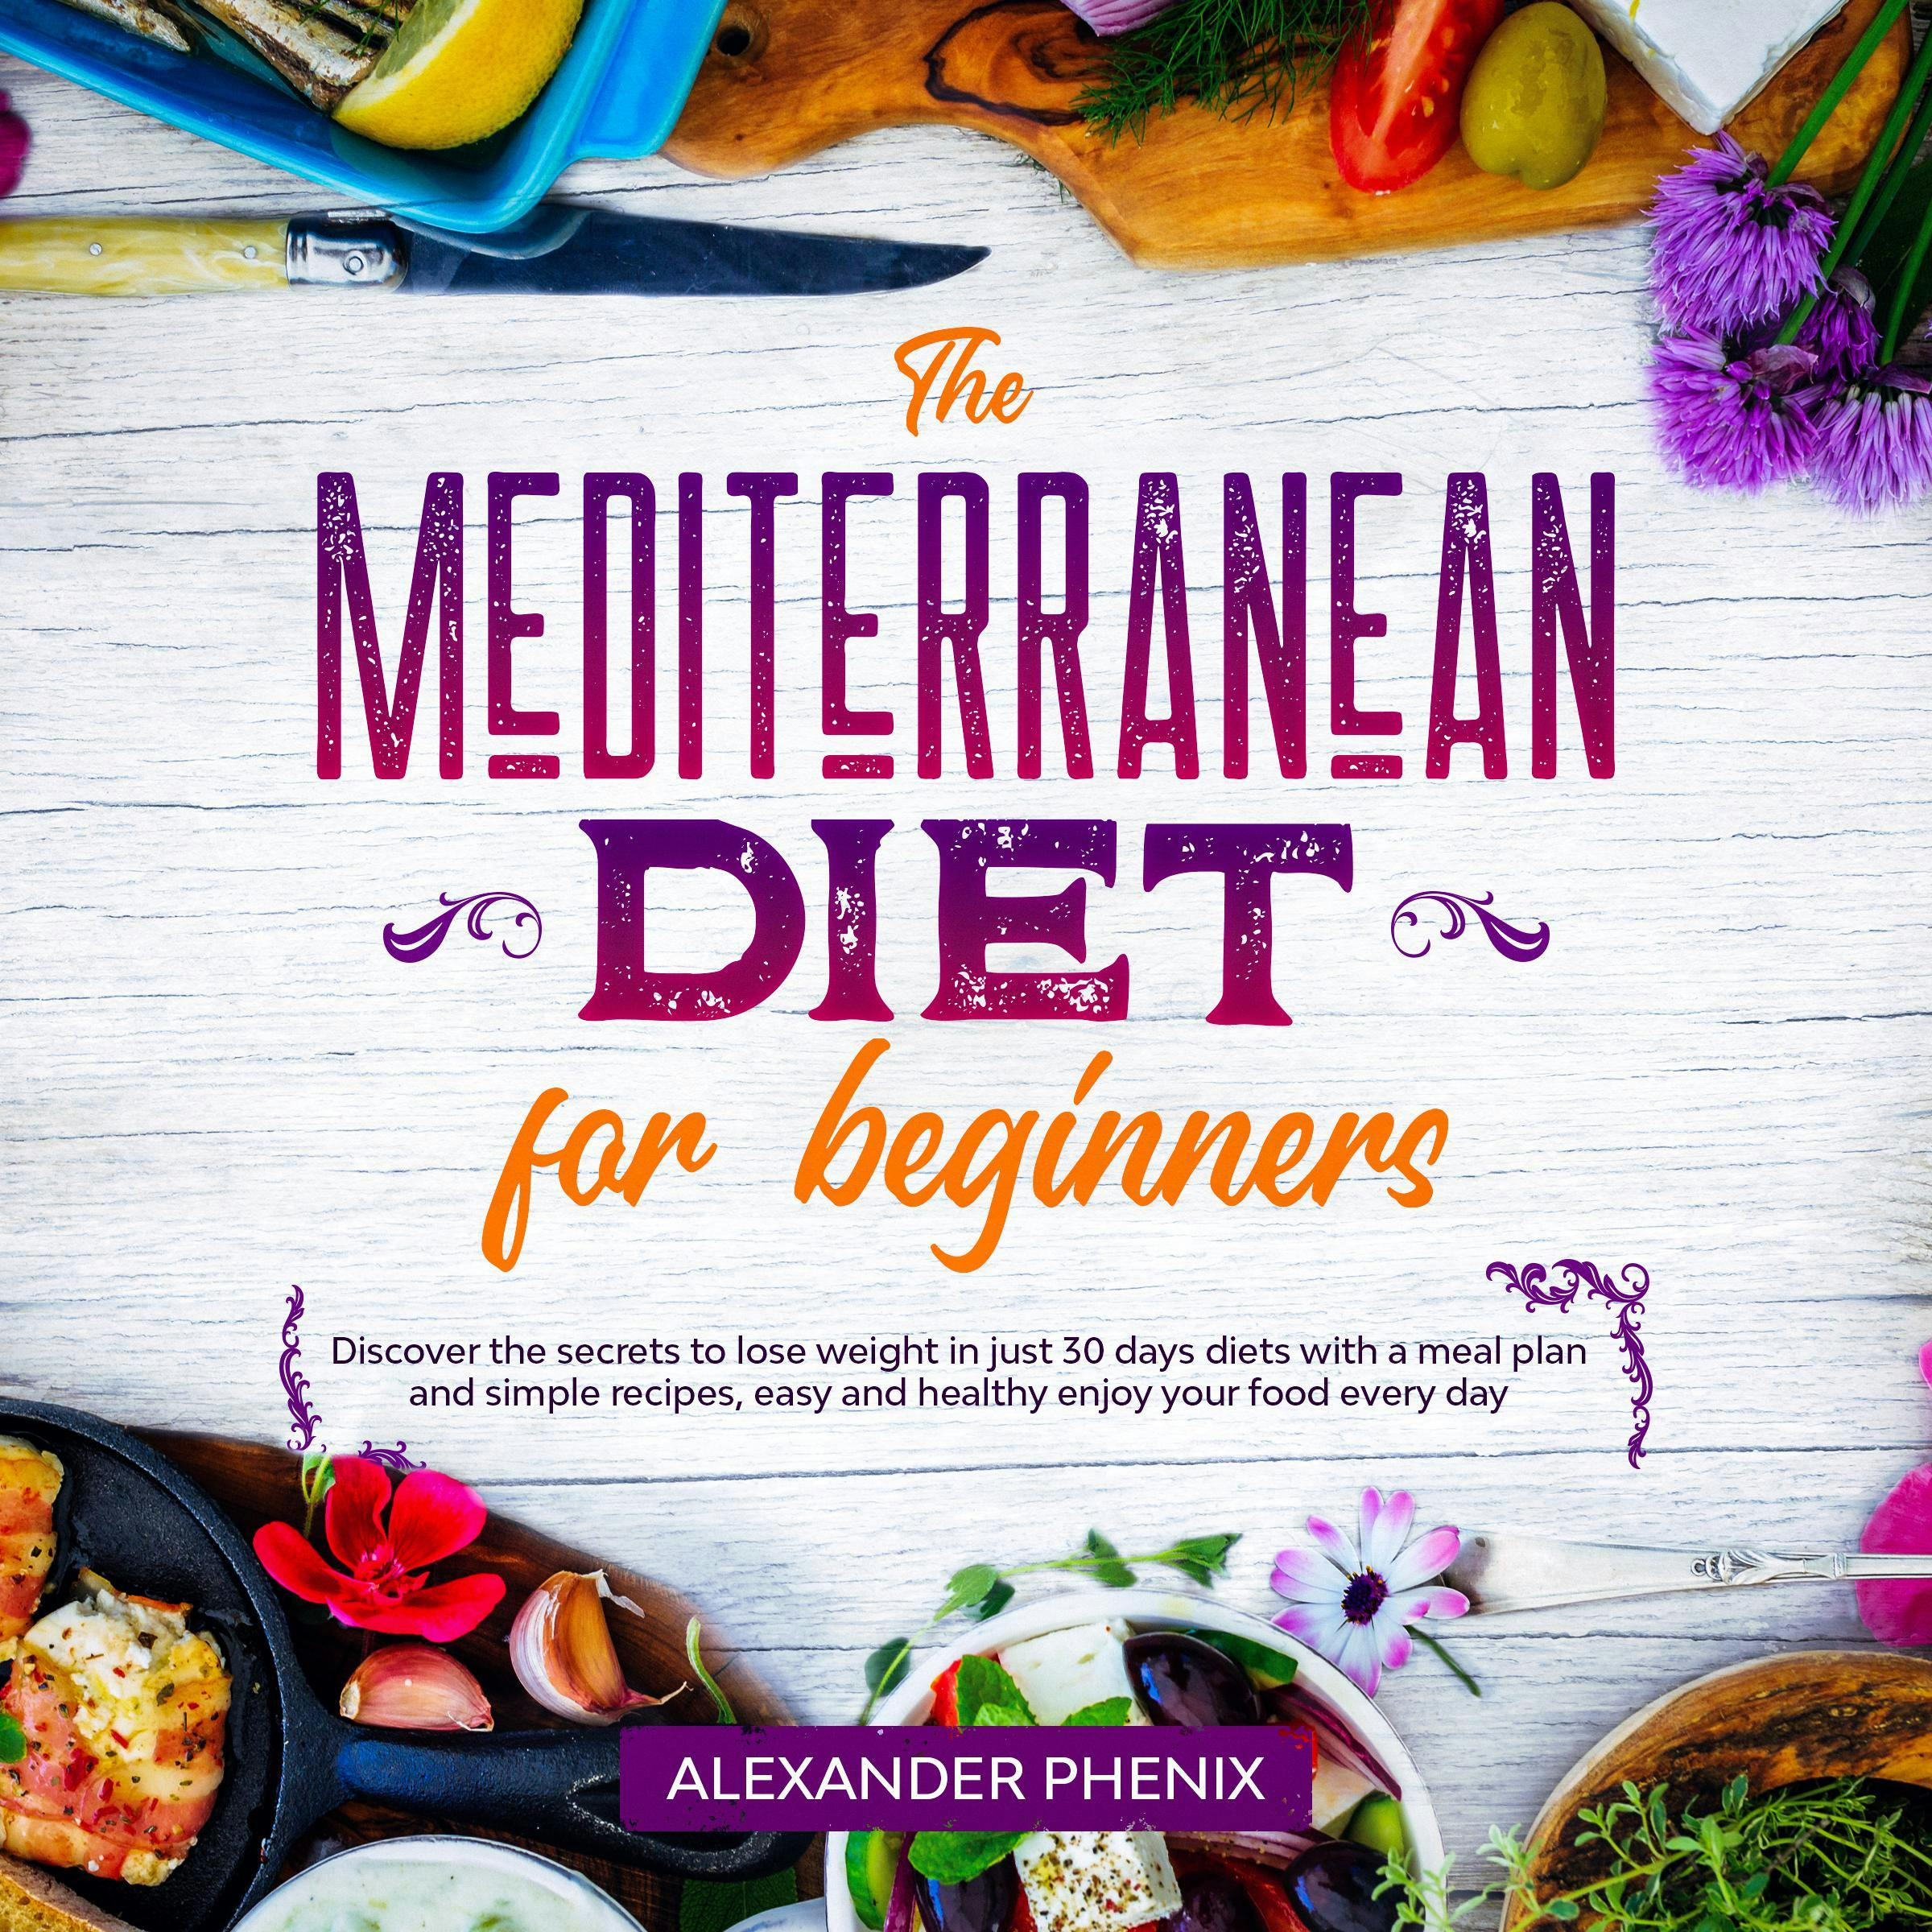 The Mediterranean diet for Beginners: Discover the secrets to lose weight in just 30 days diets with a meal plan and simple recipes, easy and healthy enjoy your food every day - Alexander Phenix